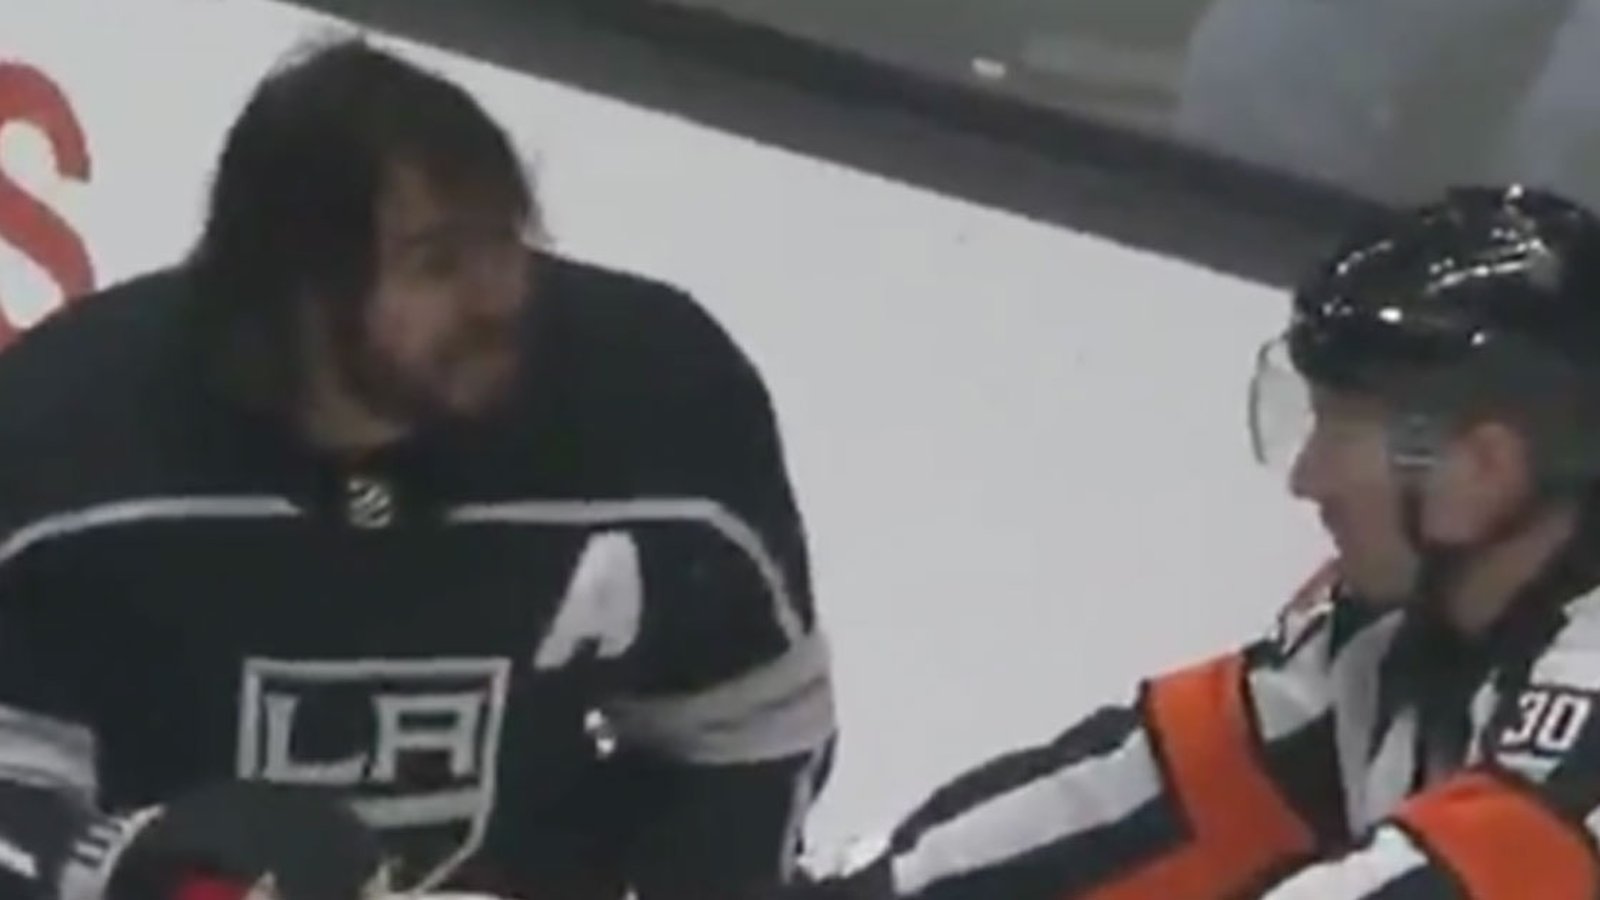 Doughty complains to referee about holding call in funniest mic'd up segment you'll see! 